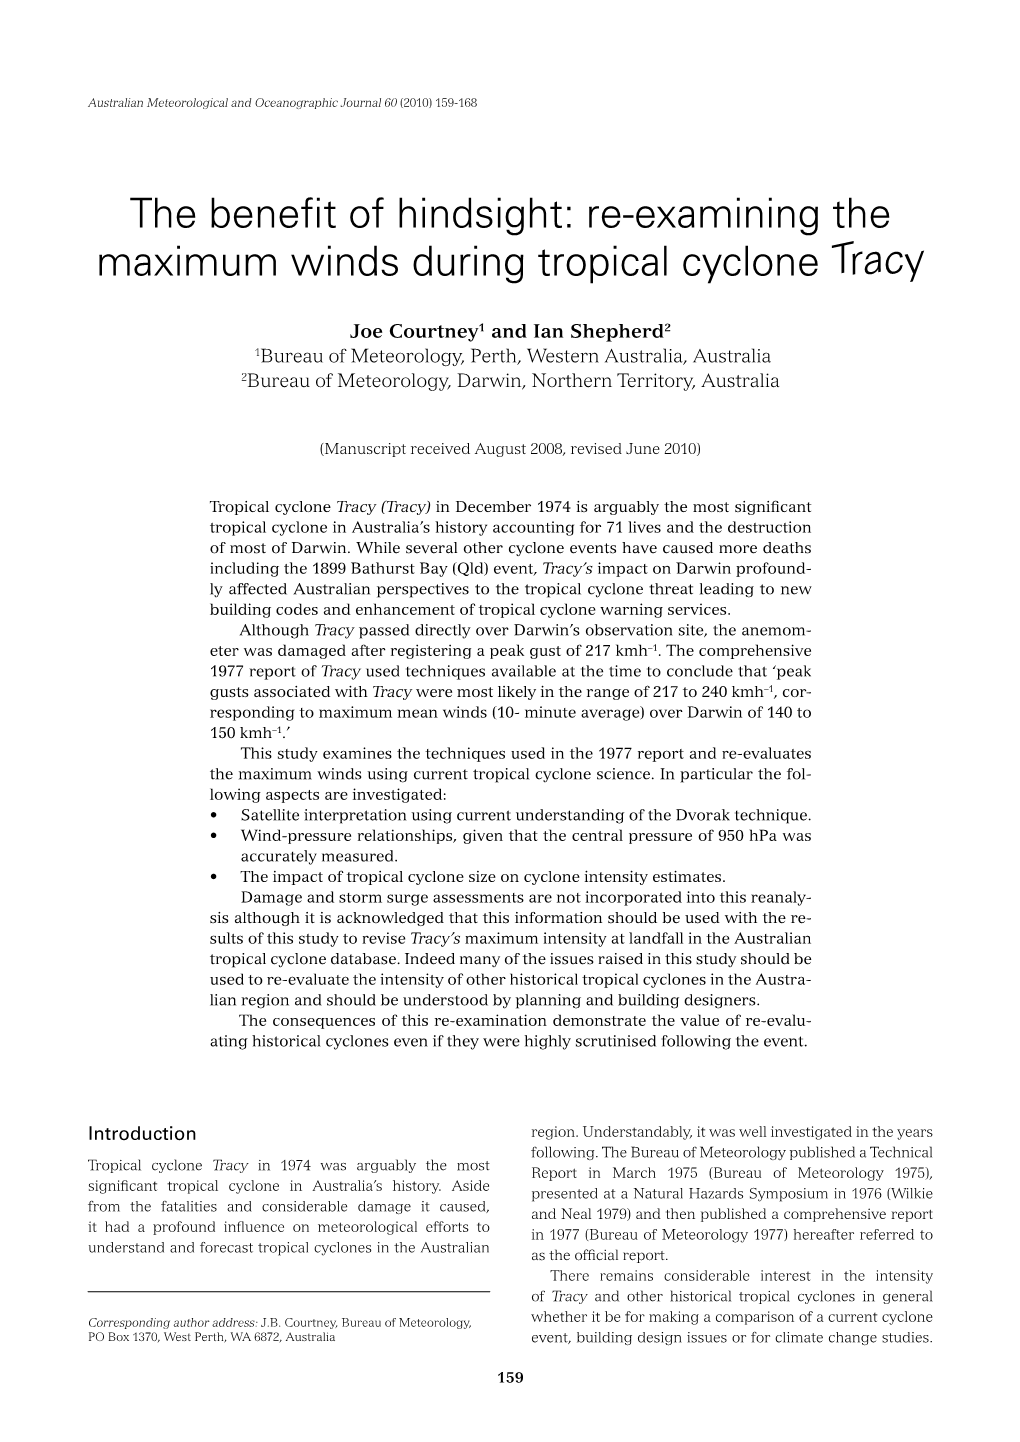 Re-Examining the Maximum Winds During Tropical Cyclone Tracy